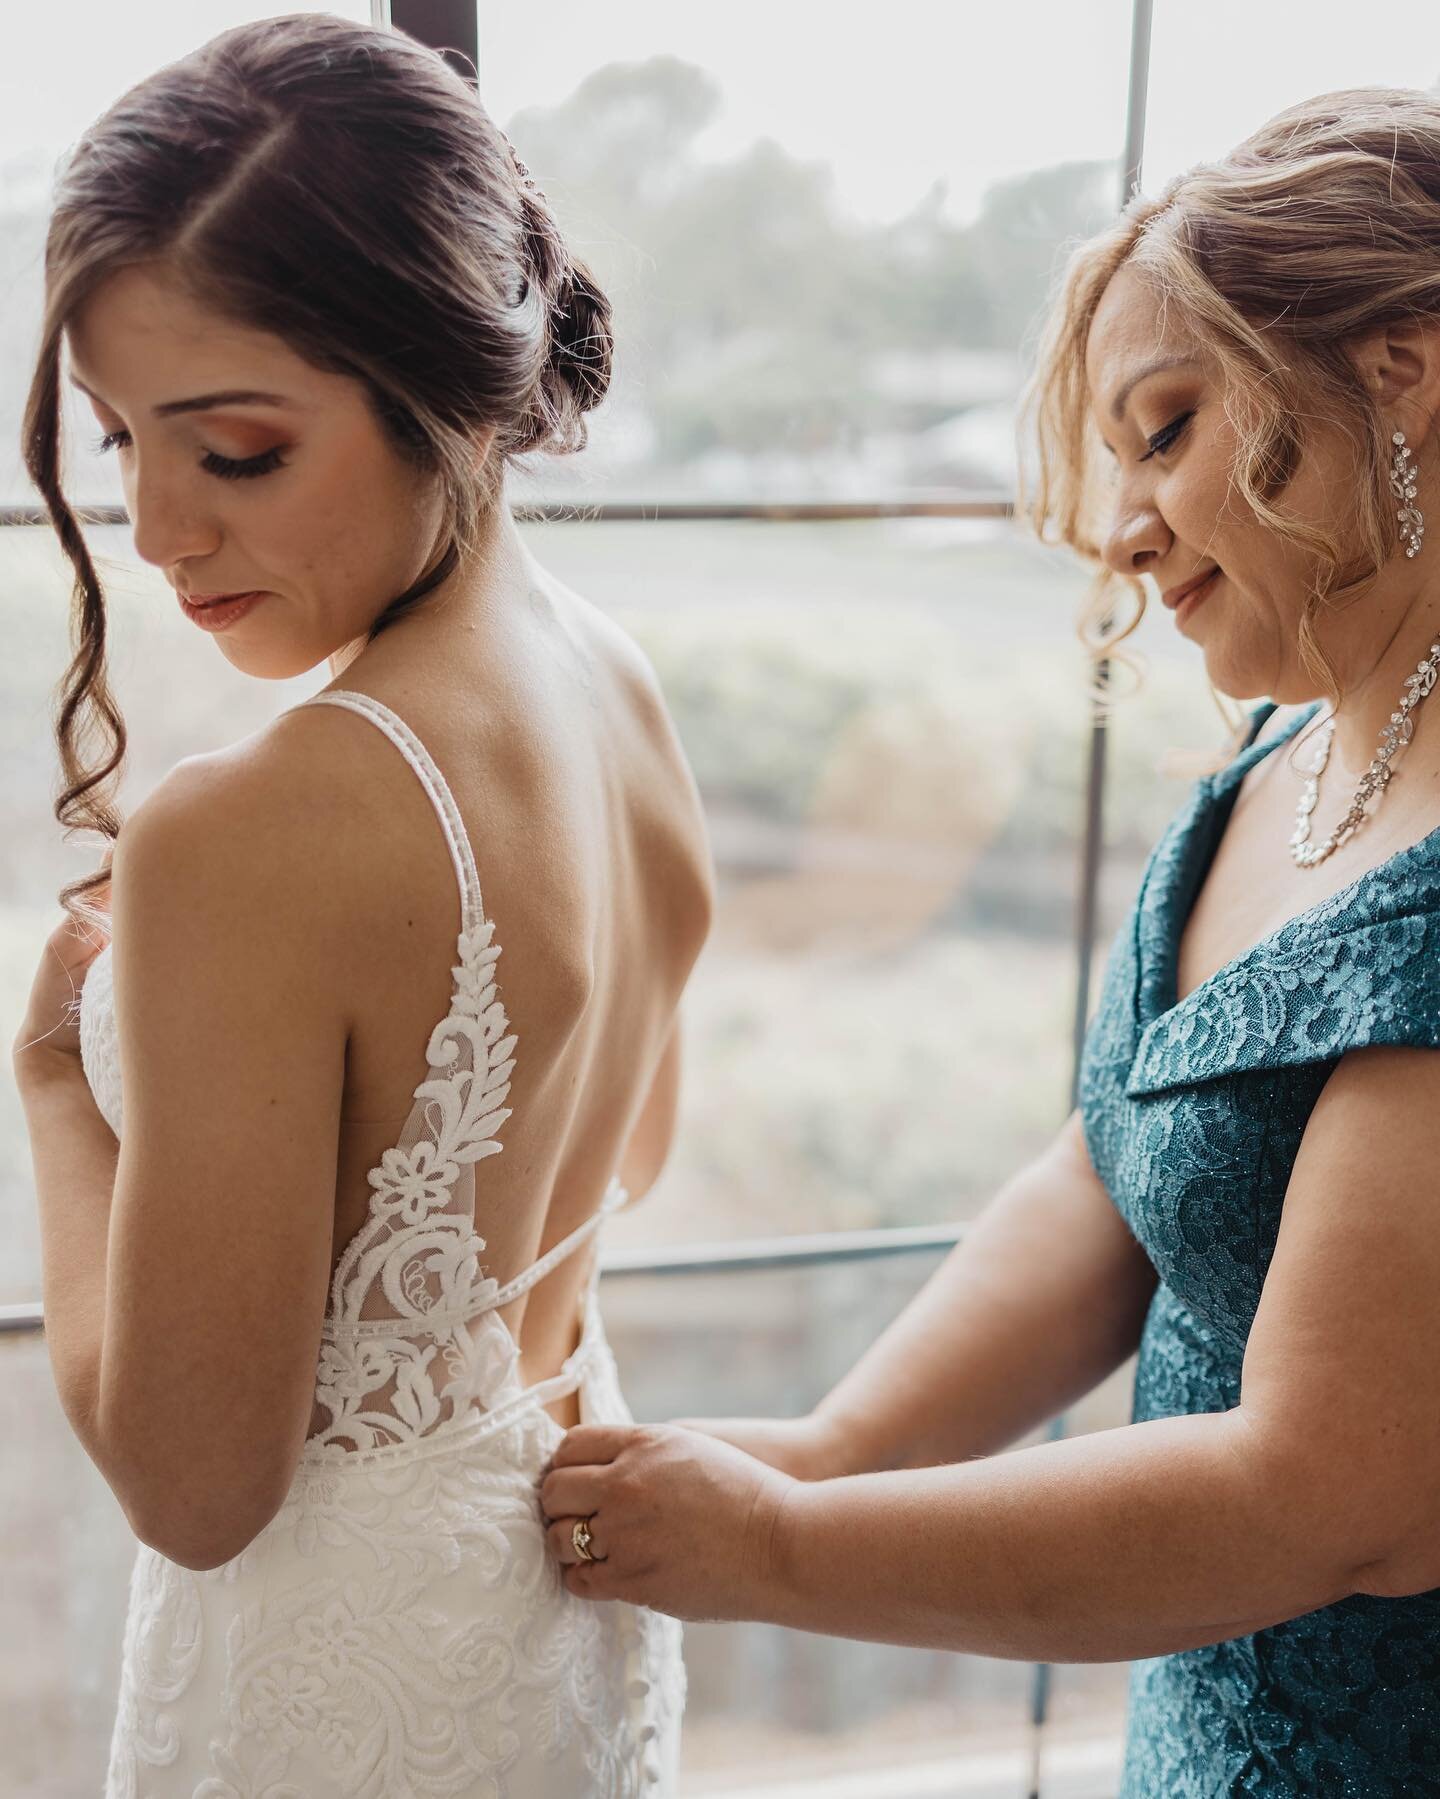 Swipe for some good happy cries🥹

WOW. The emotion on these photos has me choked up all over again. It was such a heart warming moment between Isabel and her momma as she helped Isabel get into her dress.  Mom got so emotional in this moment. 
And I